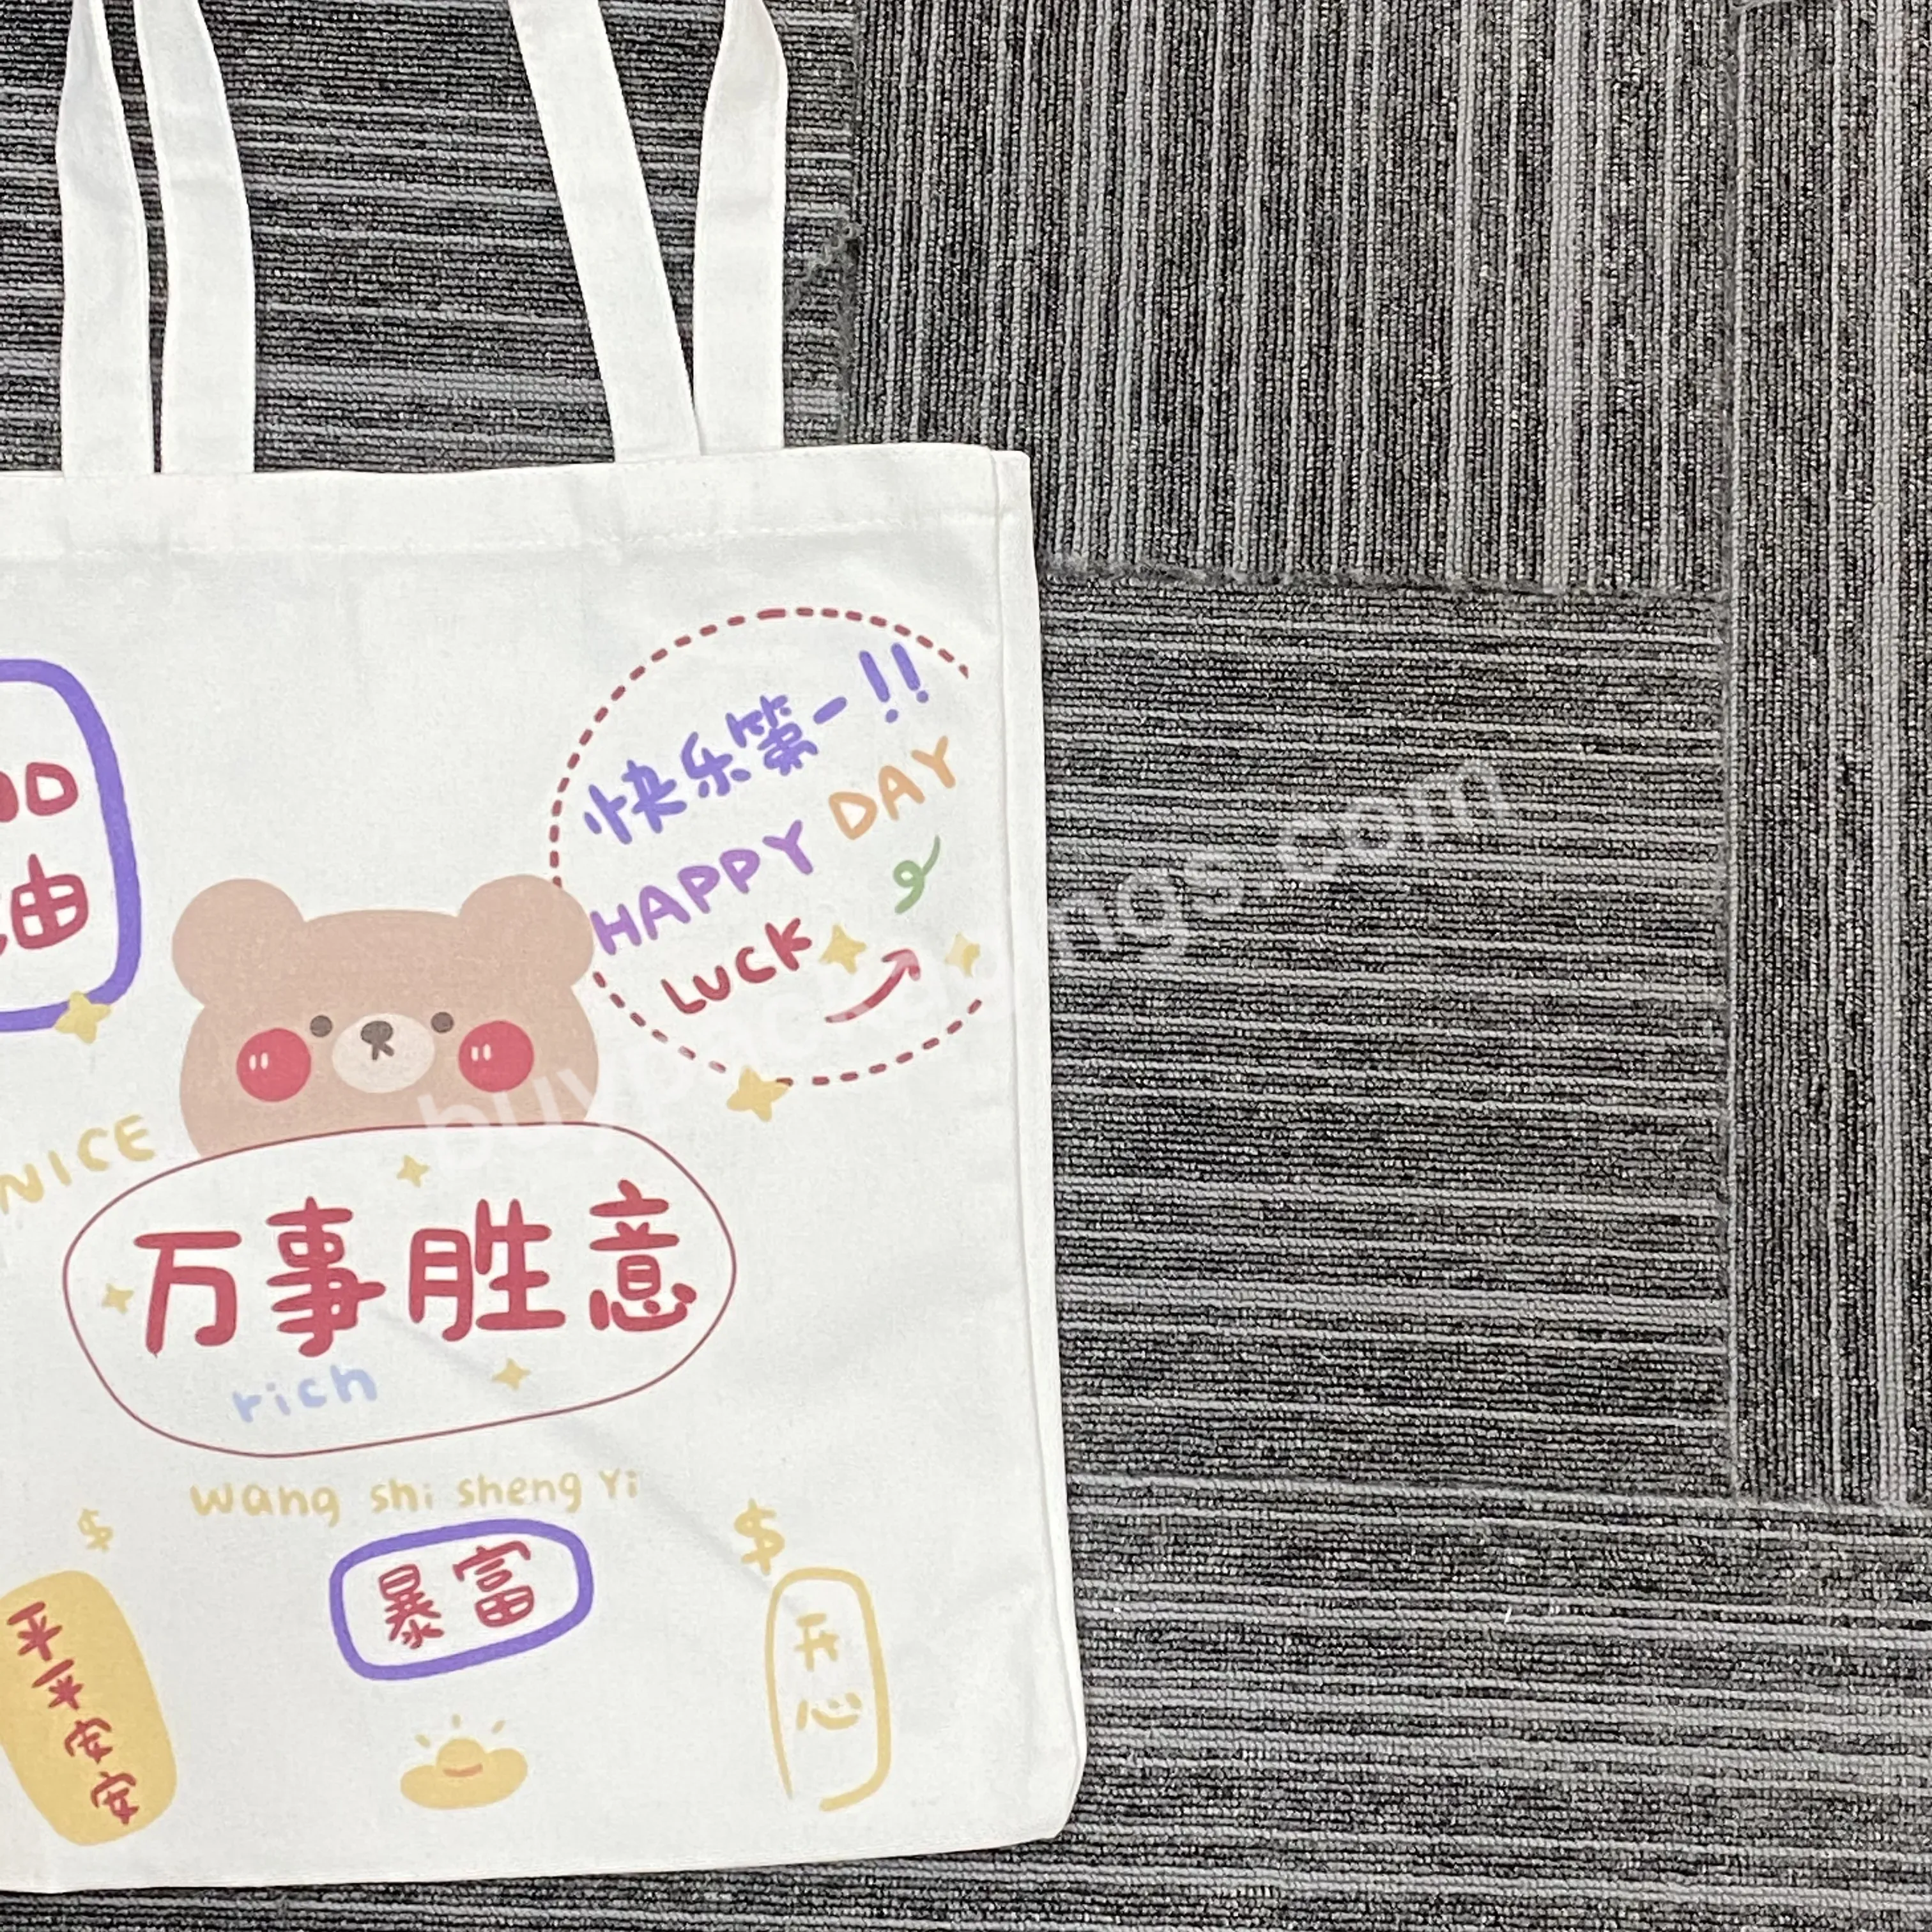 Customized Logo Style Pattern Promotion Custom Printed Plain Western Gifts Eco Grocery Shopping Tote Cotton Canvas Bag - Buy Canvas Bag,Customize Bag,Folding Shopping Bag.